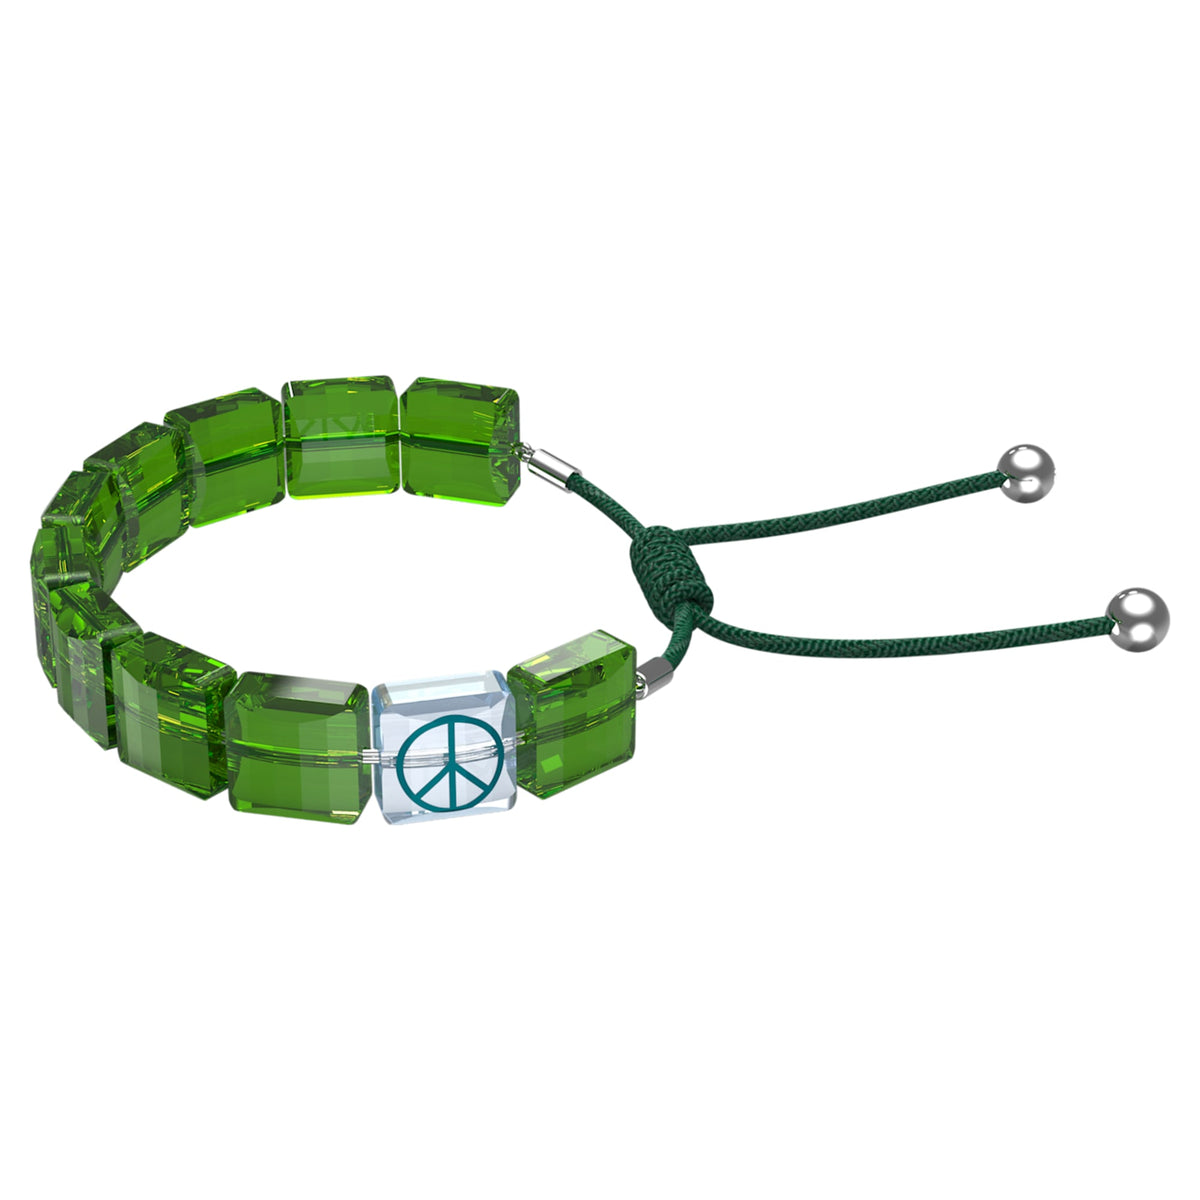 Swarovski Letra bracelet Peace, Green, Rhodium plated 5615003 - Limited Edition- Discontinued